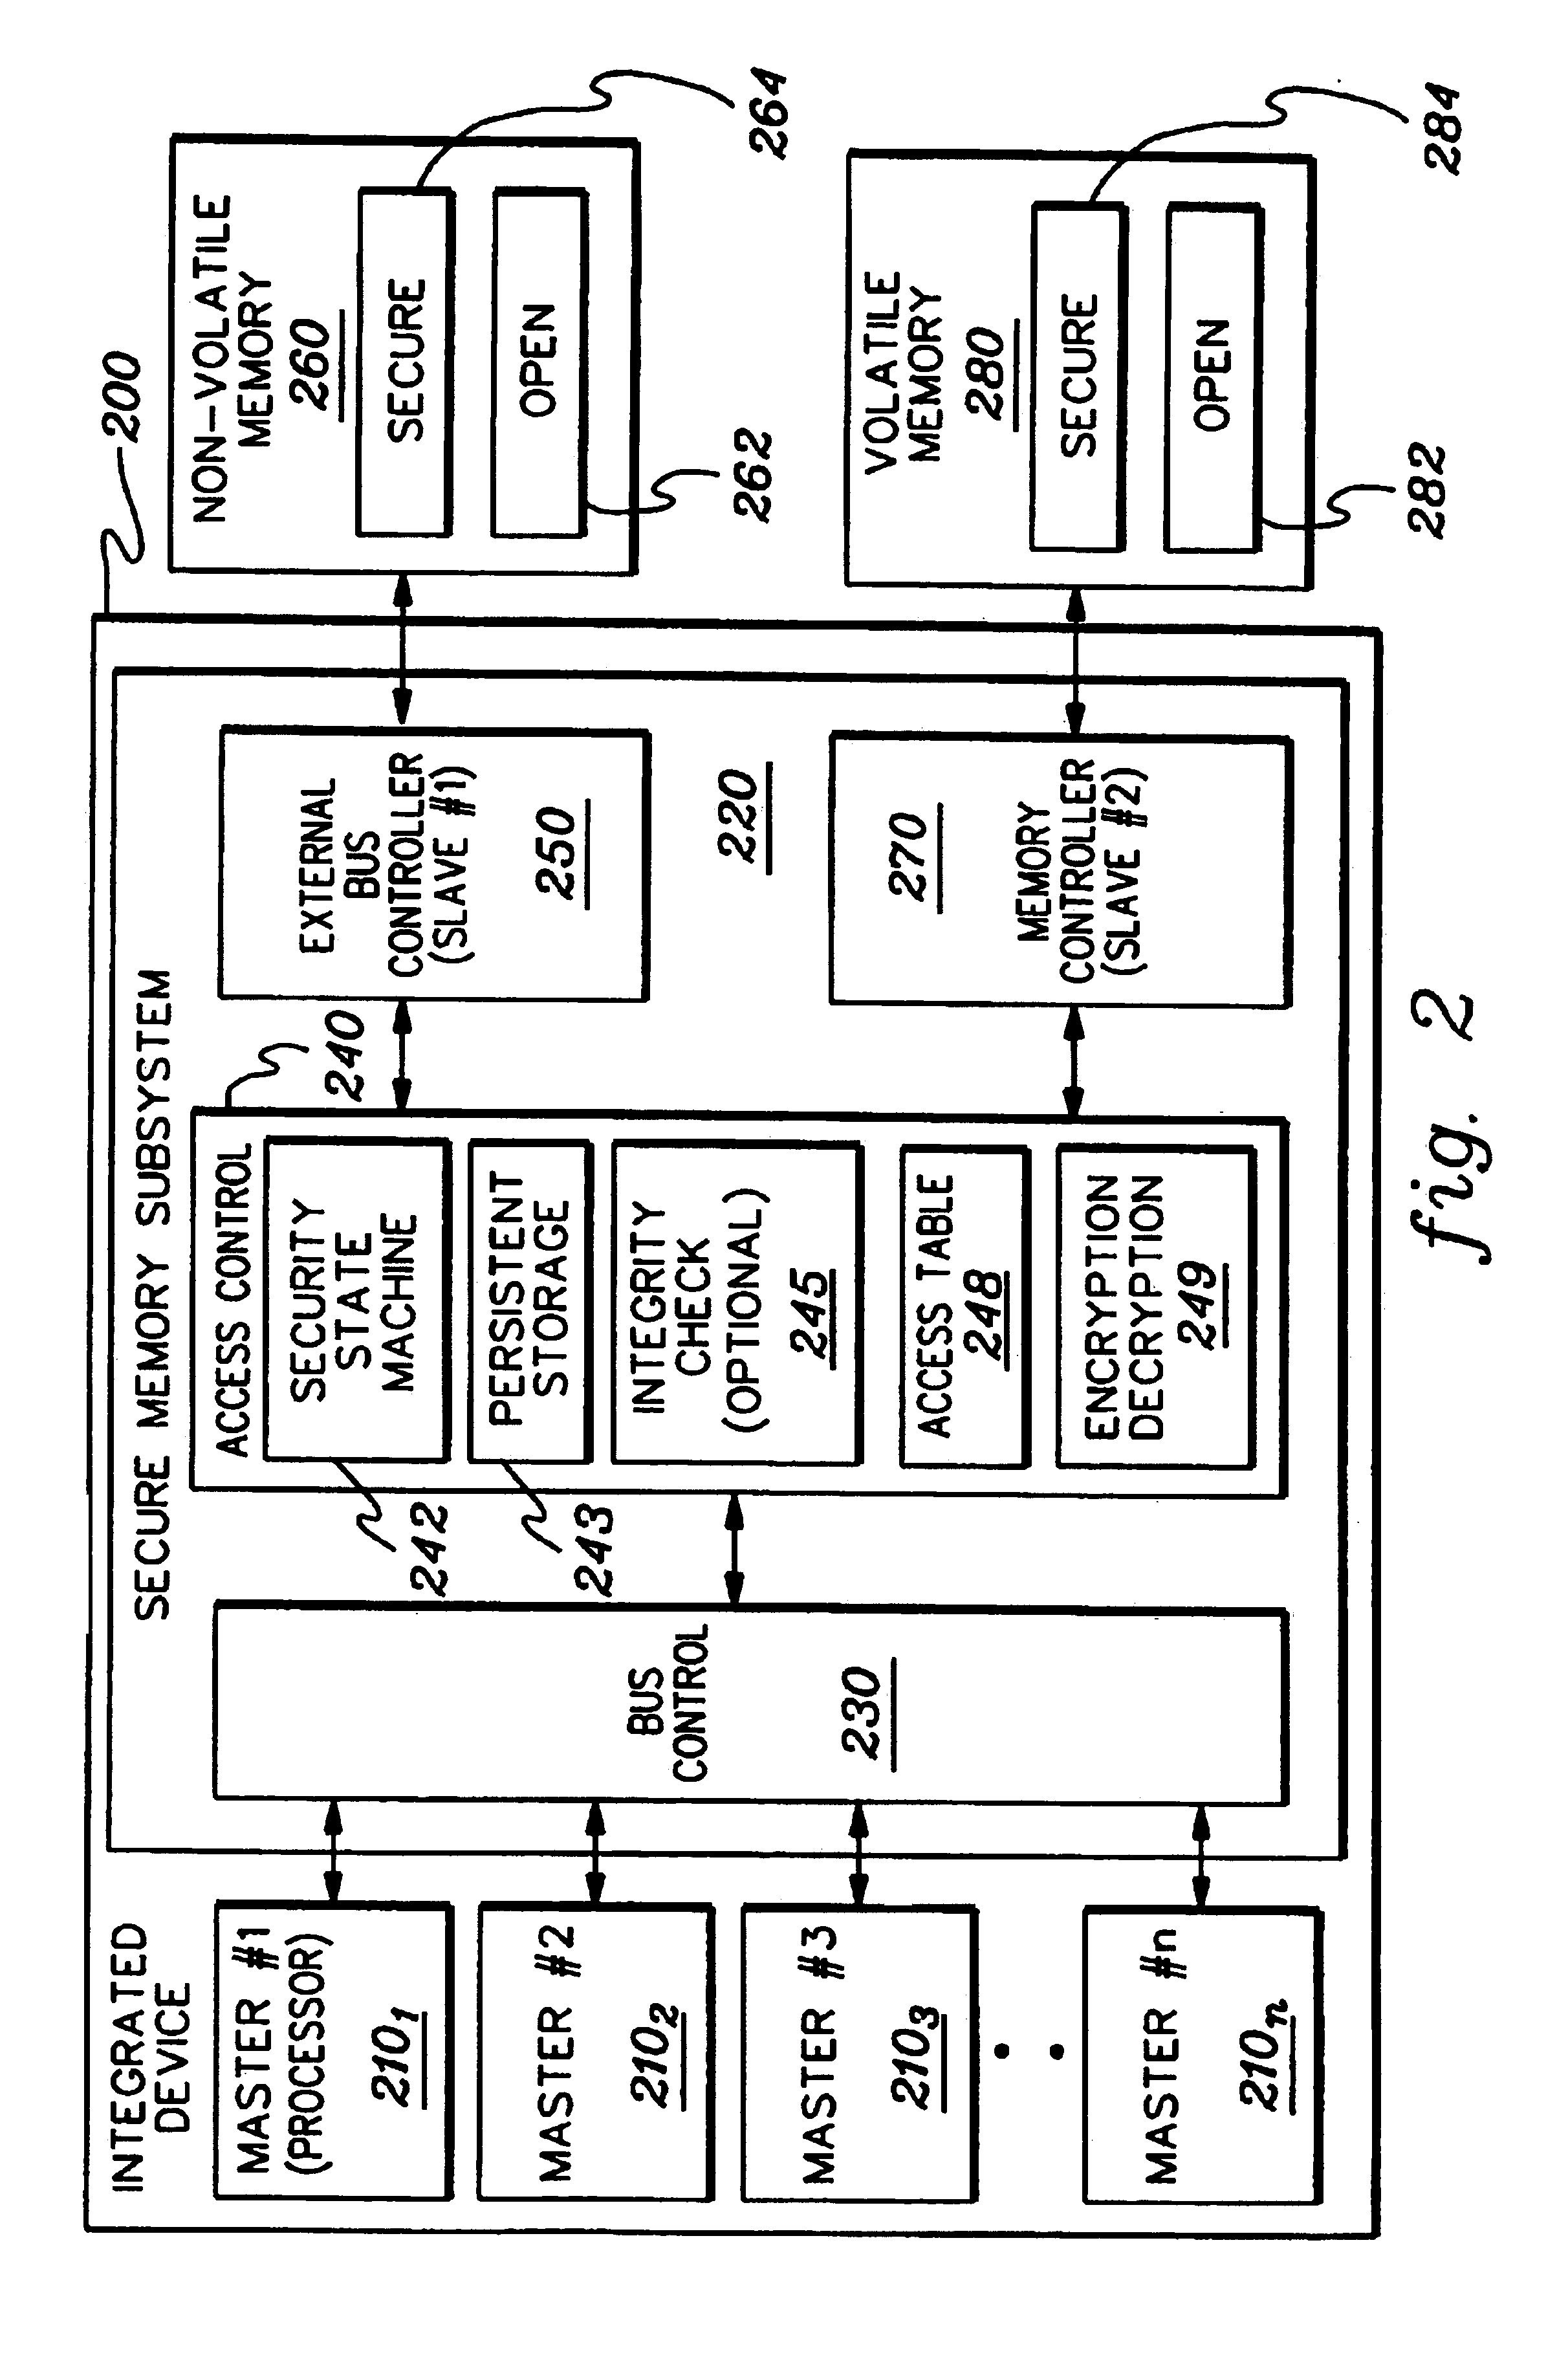 Initializing, maintaining, updating and recovering secure operation within an integrated system employing a data access control function